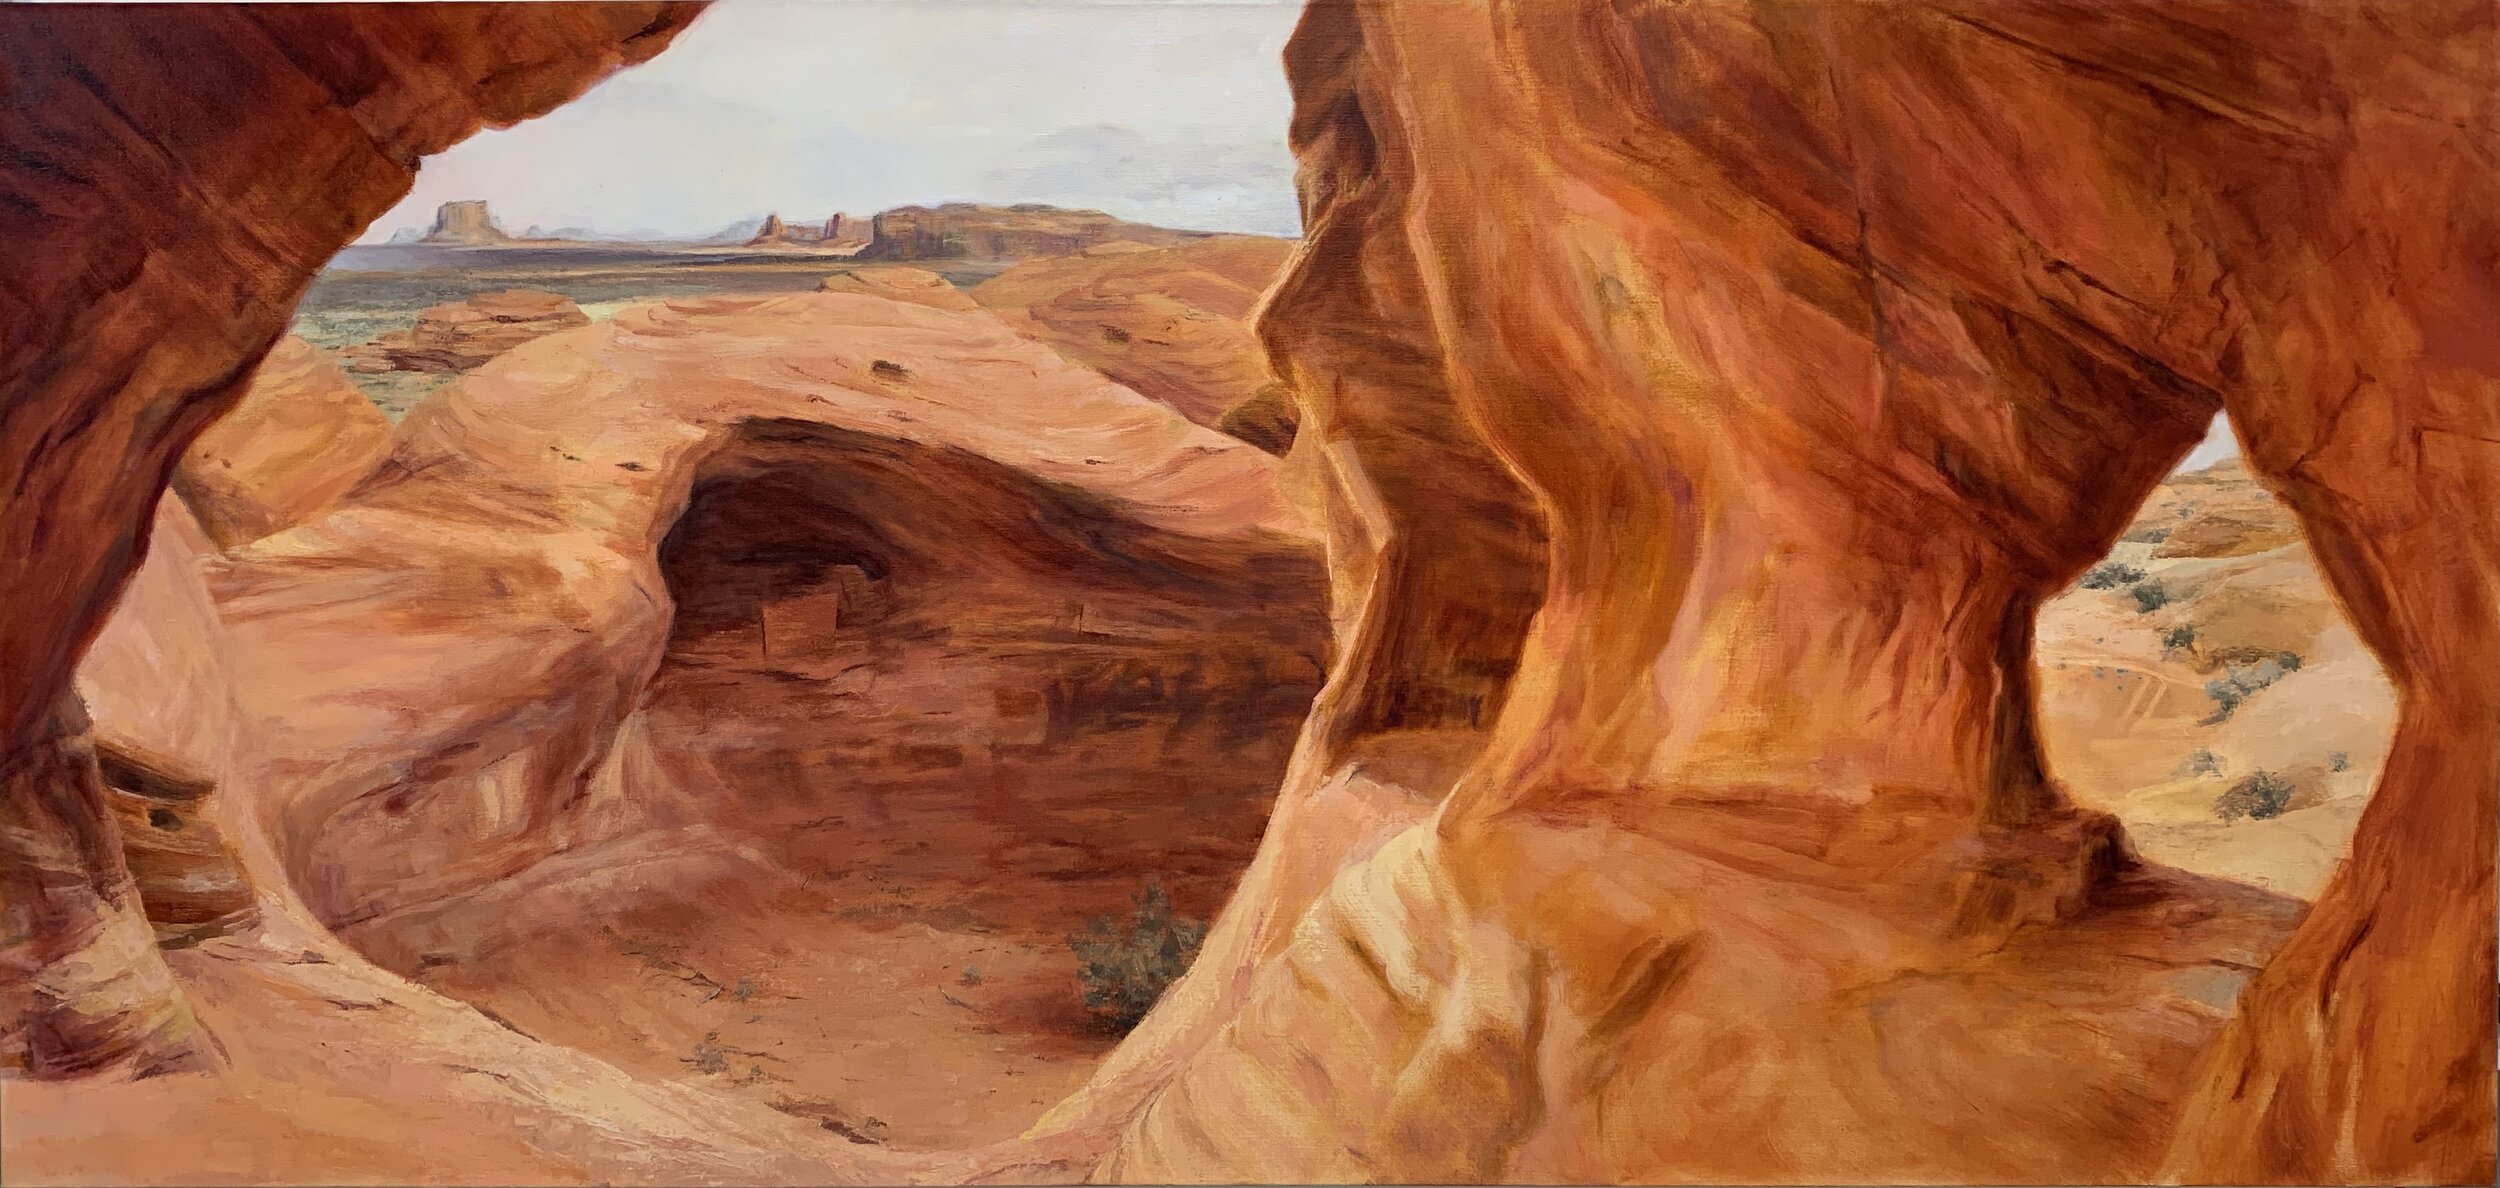   Mystery Valley , 2020 oil on linen, 36 x 80 in 